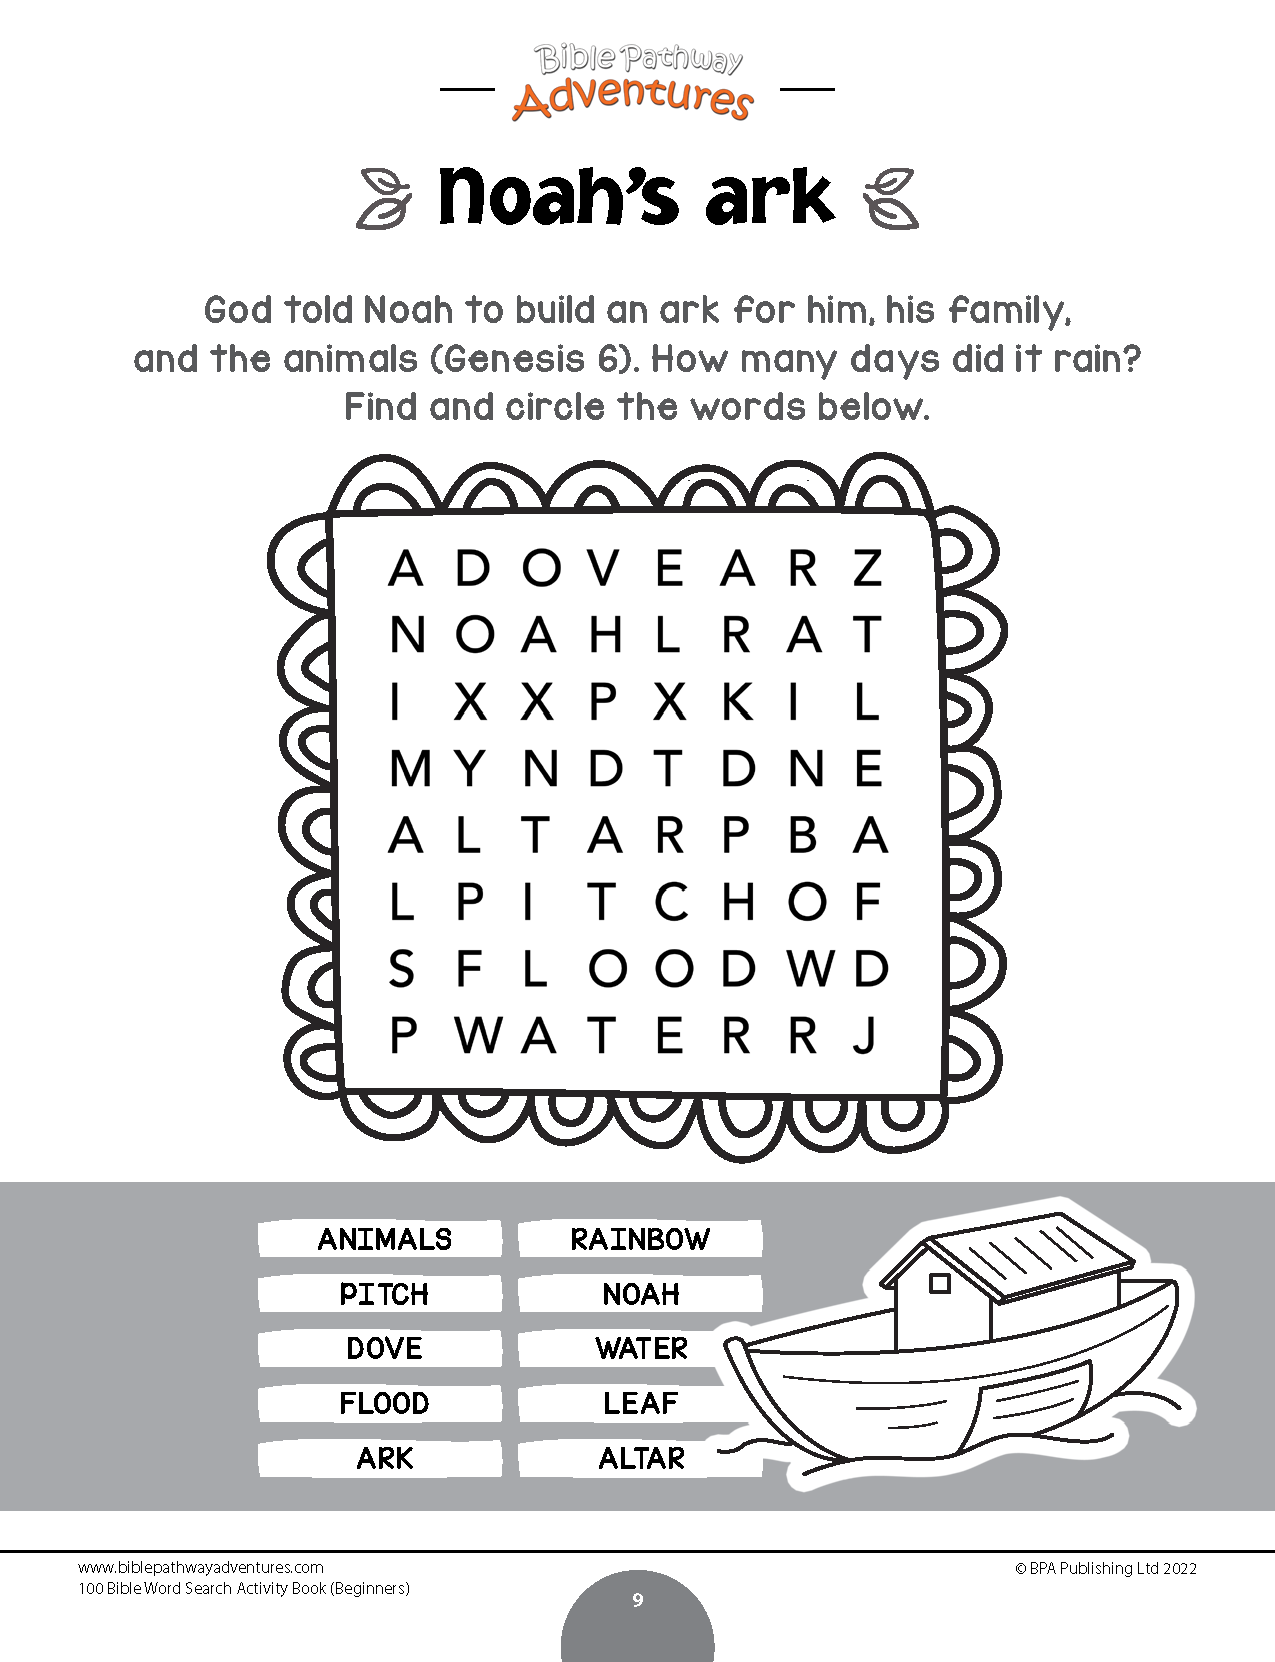 Bible Word Search Activity Book for Beginners (paperback)